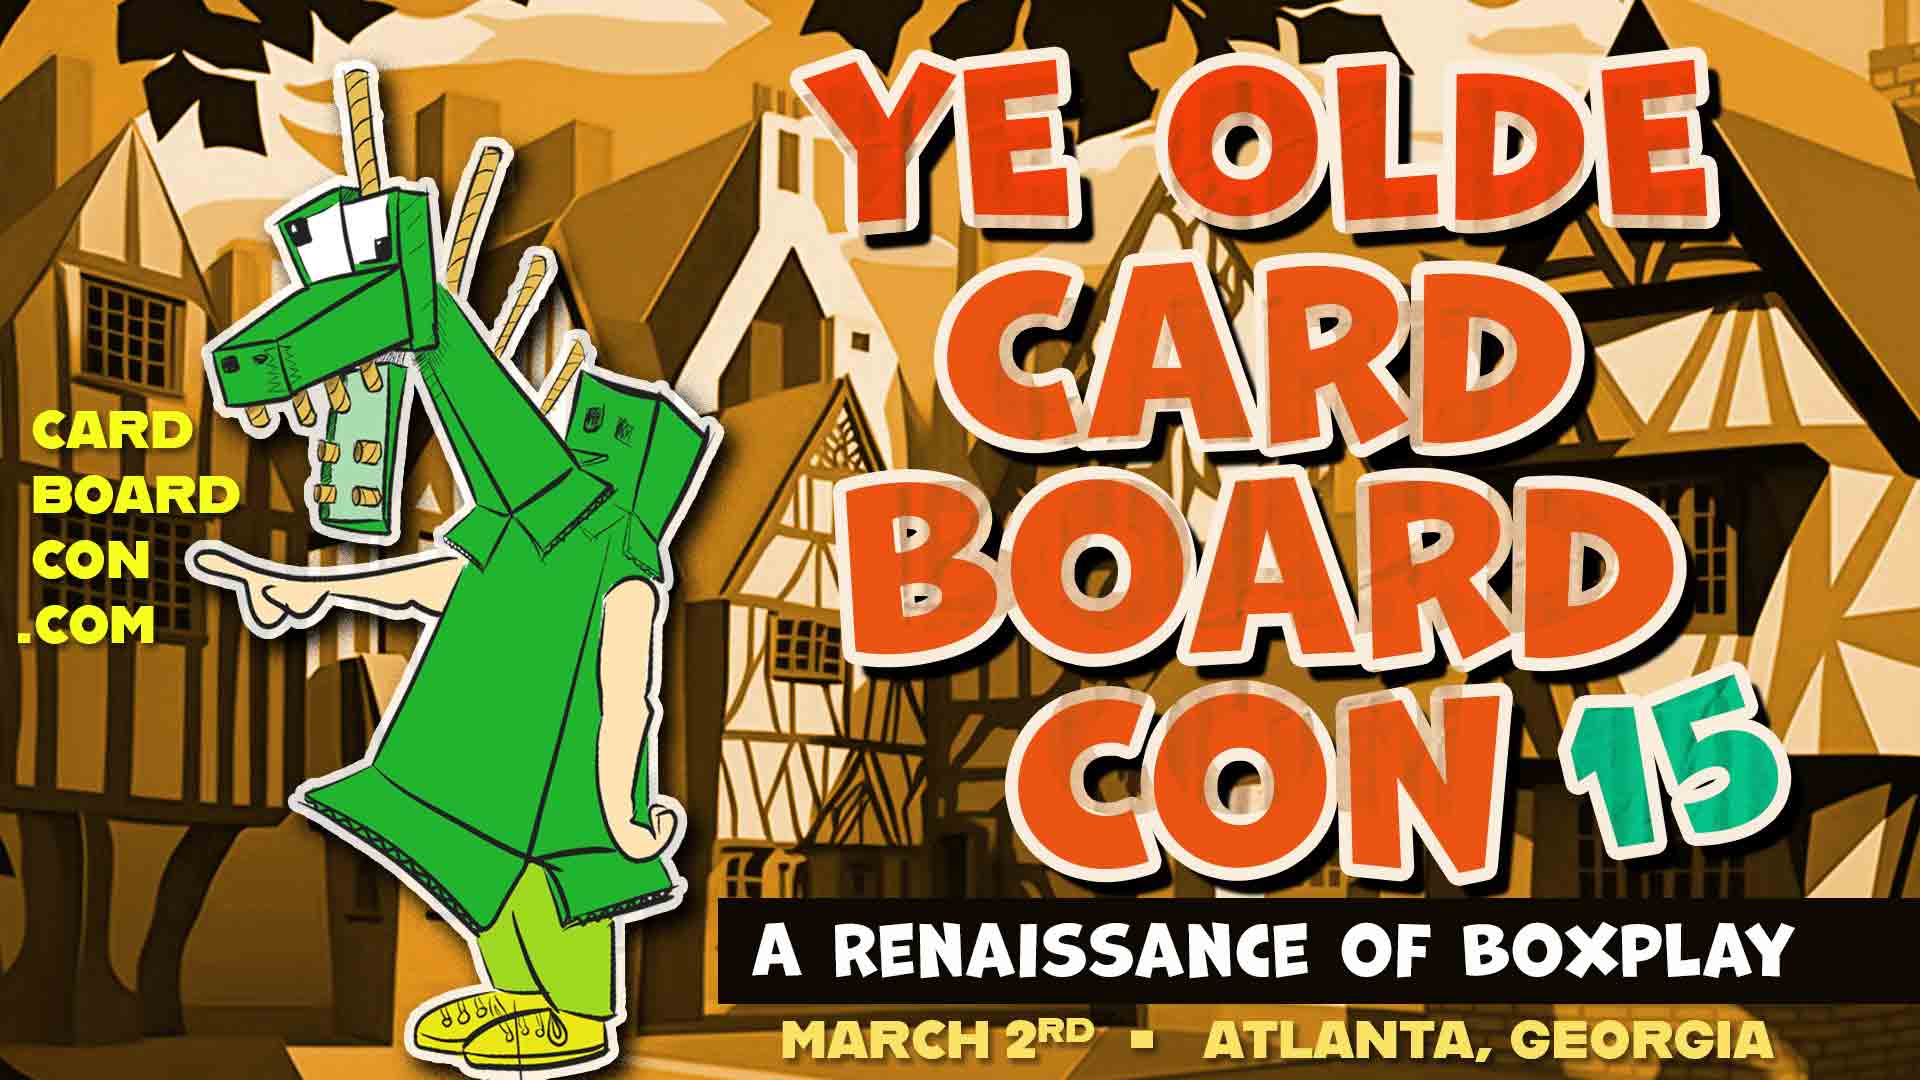 Ye Olde Cardboard Con poster illustration by famed illustrator Drewprops featuring a cardboard boxplay dragon in front of a renfaire village.